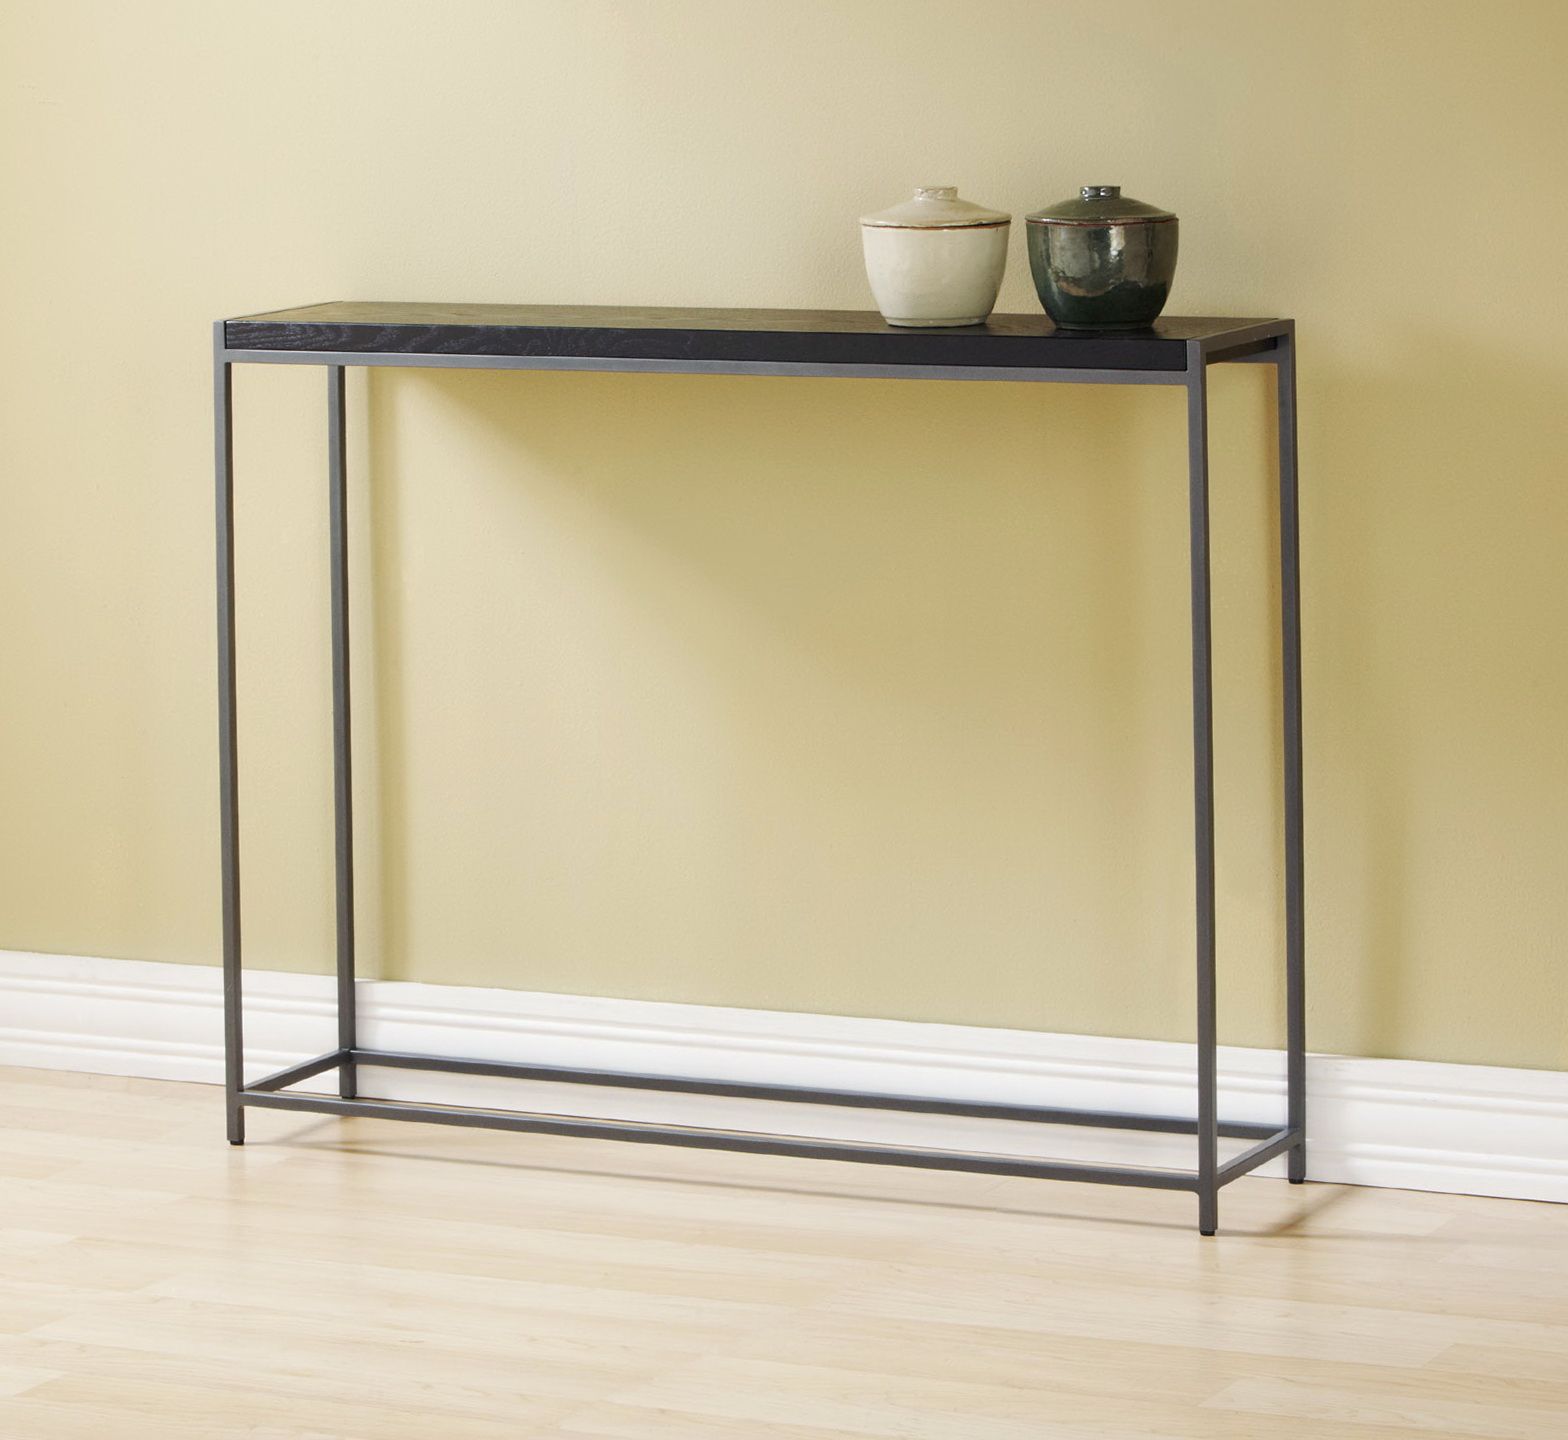 Very Thin Console Table | Home Design Ideas For Barnside Round Console Tables (Gallery 20 of 20)